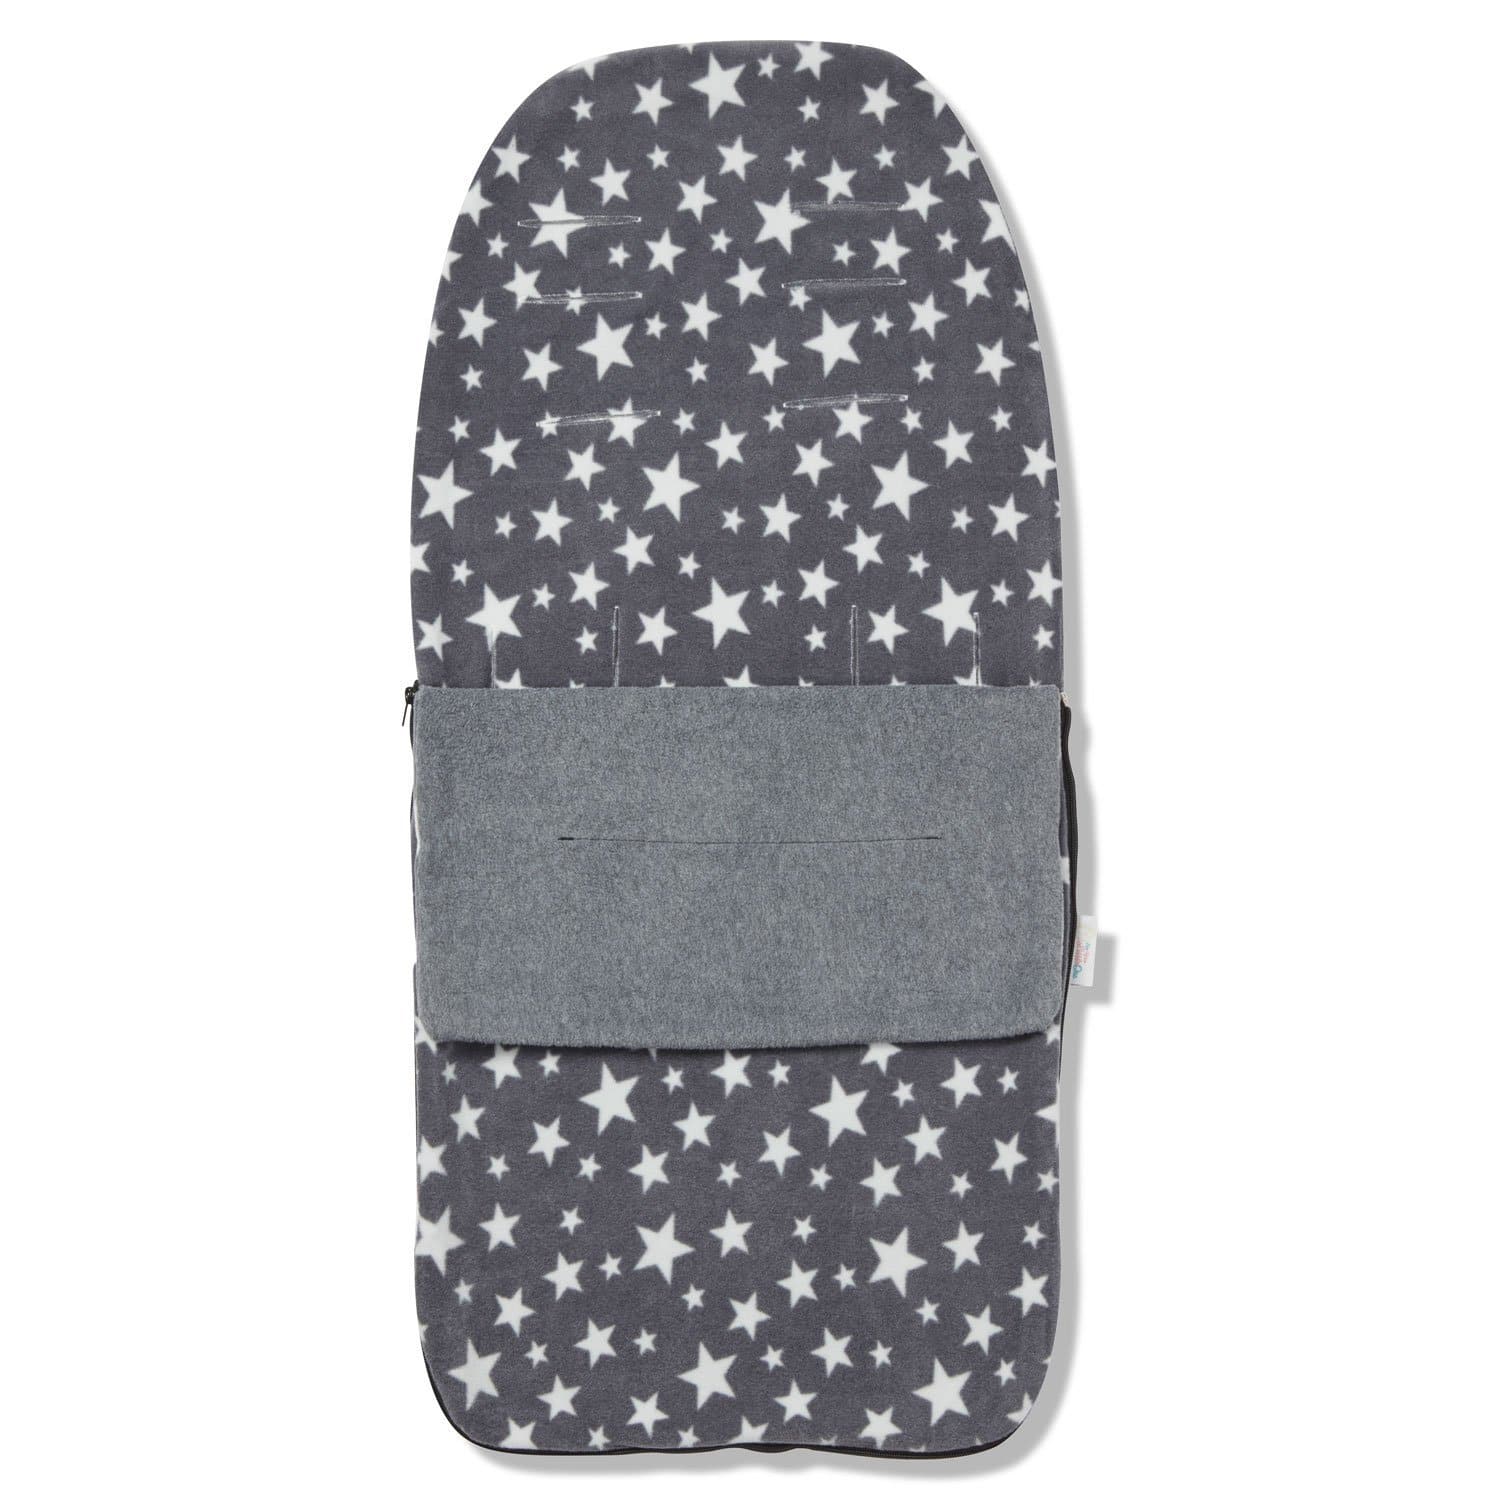 Snuggle Summer Footmuff Compatible with Uppababy - Grey Star / Fits All Models | For Your Little One